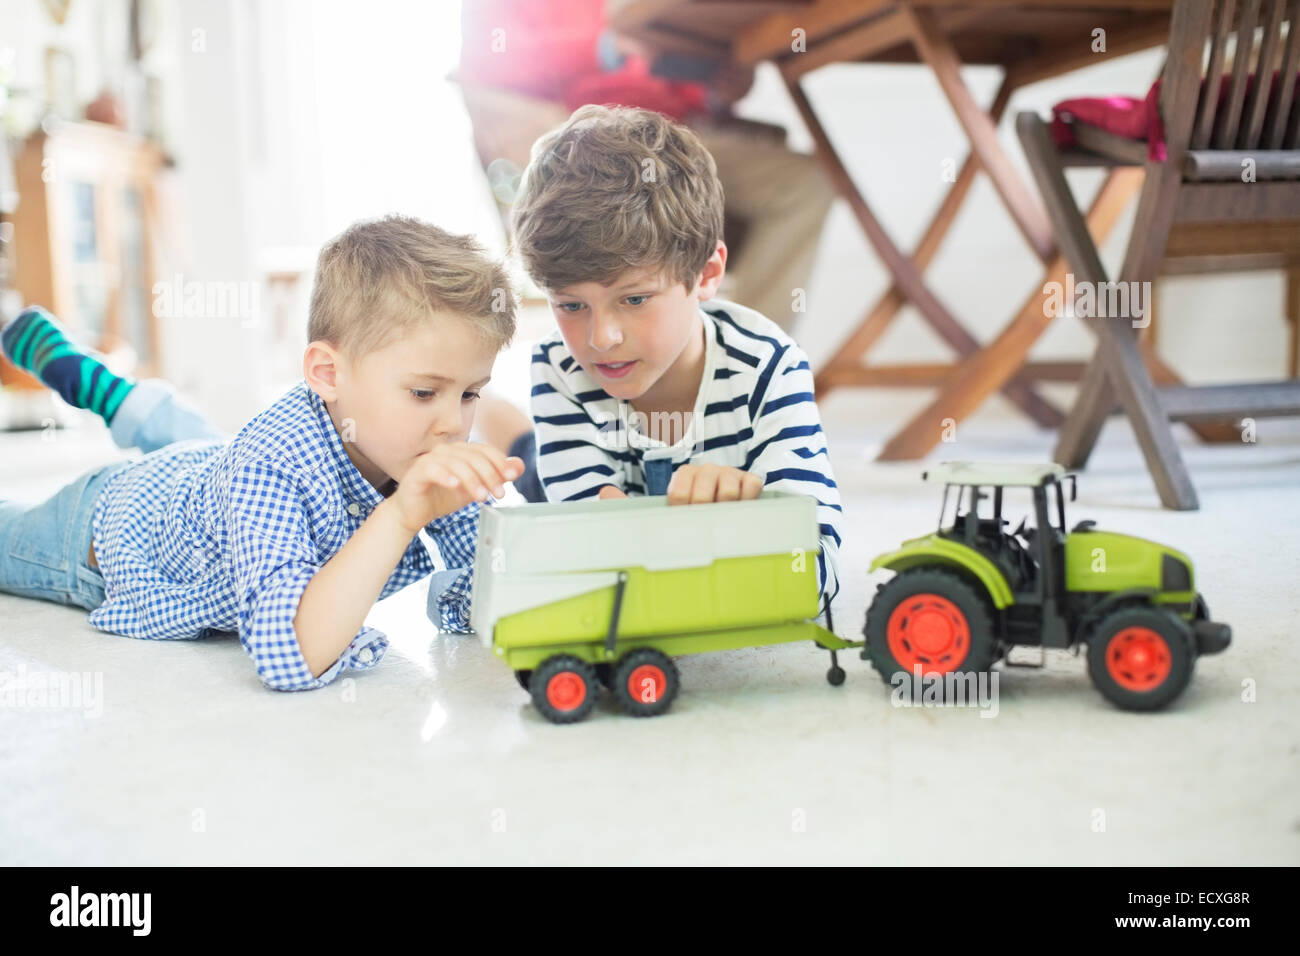 Brothers playing with toy tractor on floor Stock Photo